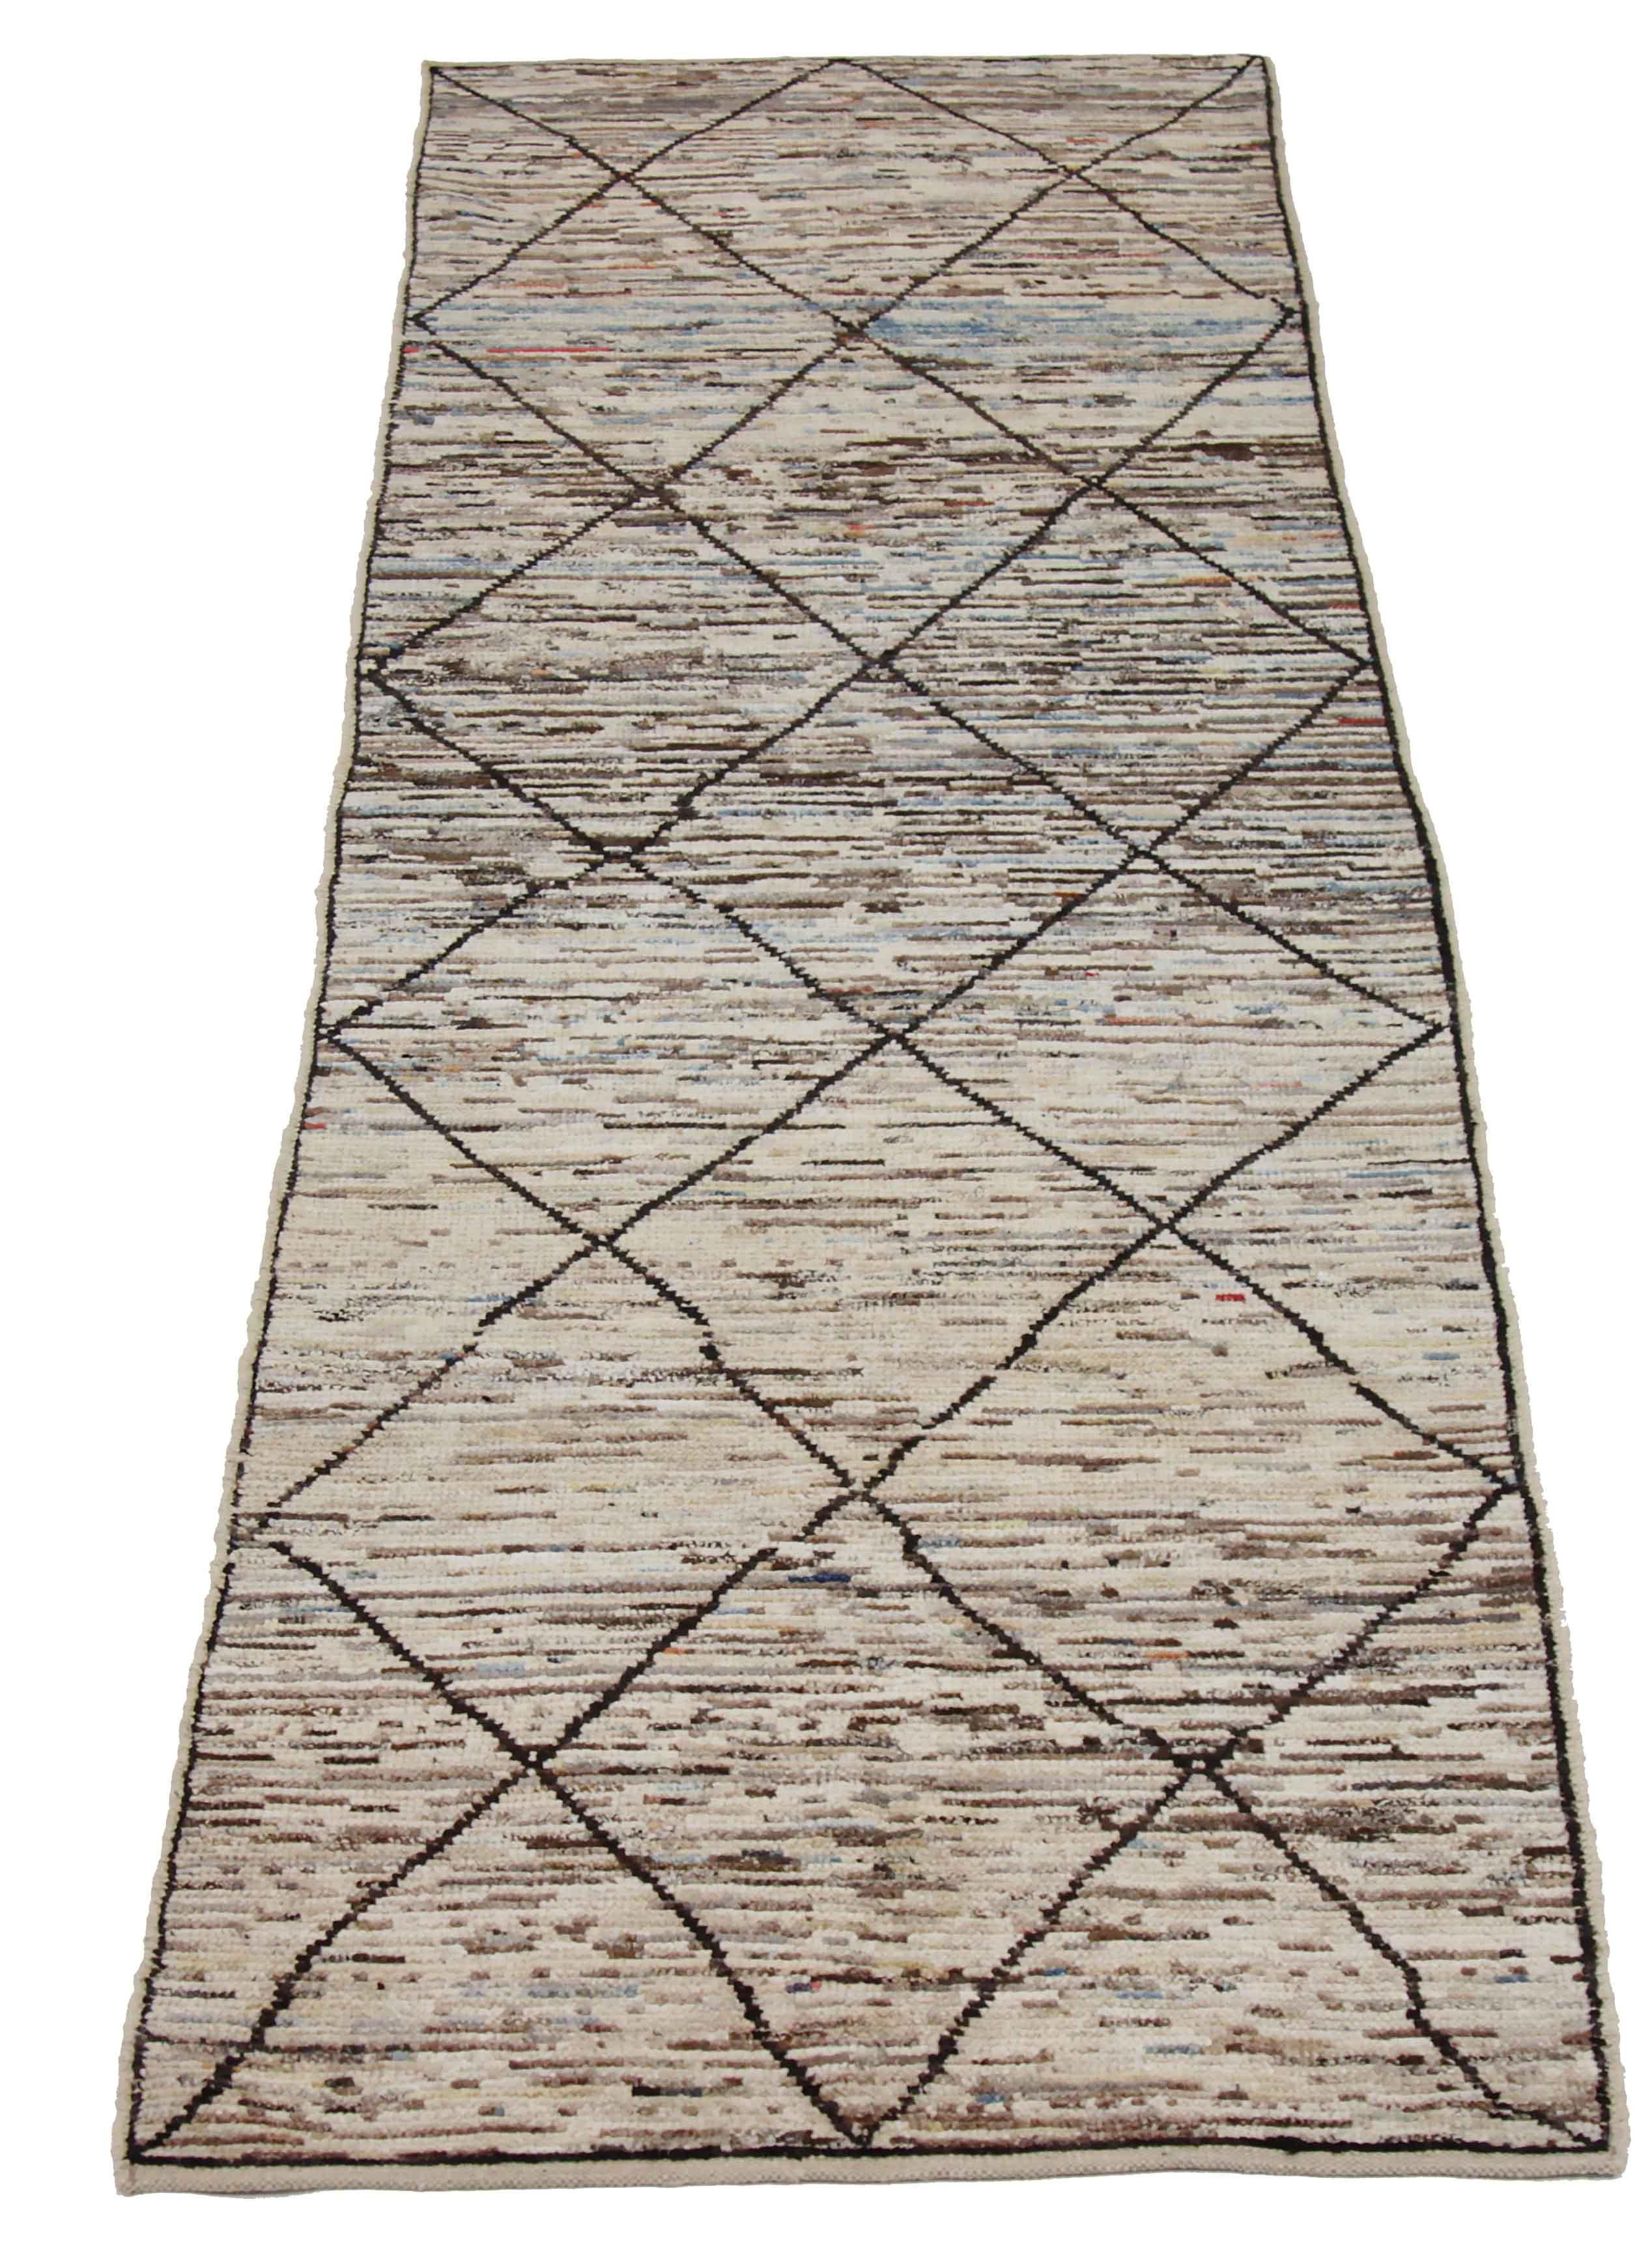 Modern Afghan runner rug handwoven from the finest sheep’s wool. It’s colored with all-natural vegetable dyes that are safe for humans and pets. This piece is a traditional Afghan weaving featuring a Moroccan inspired design. It’s highlighted by